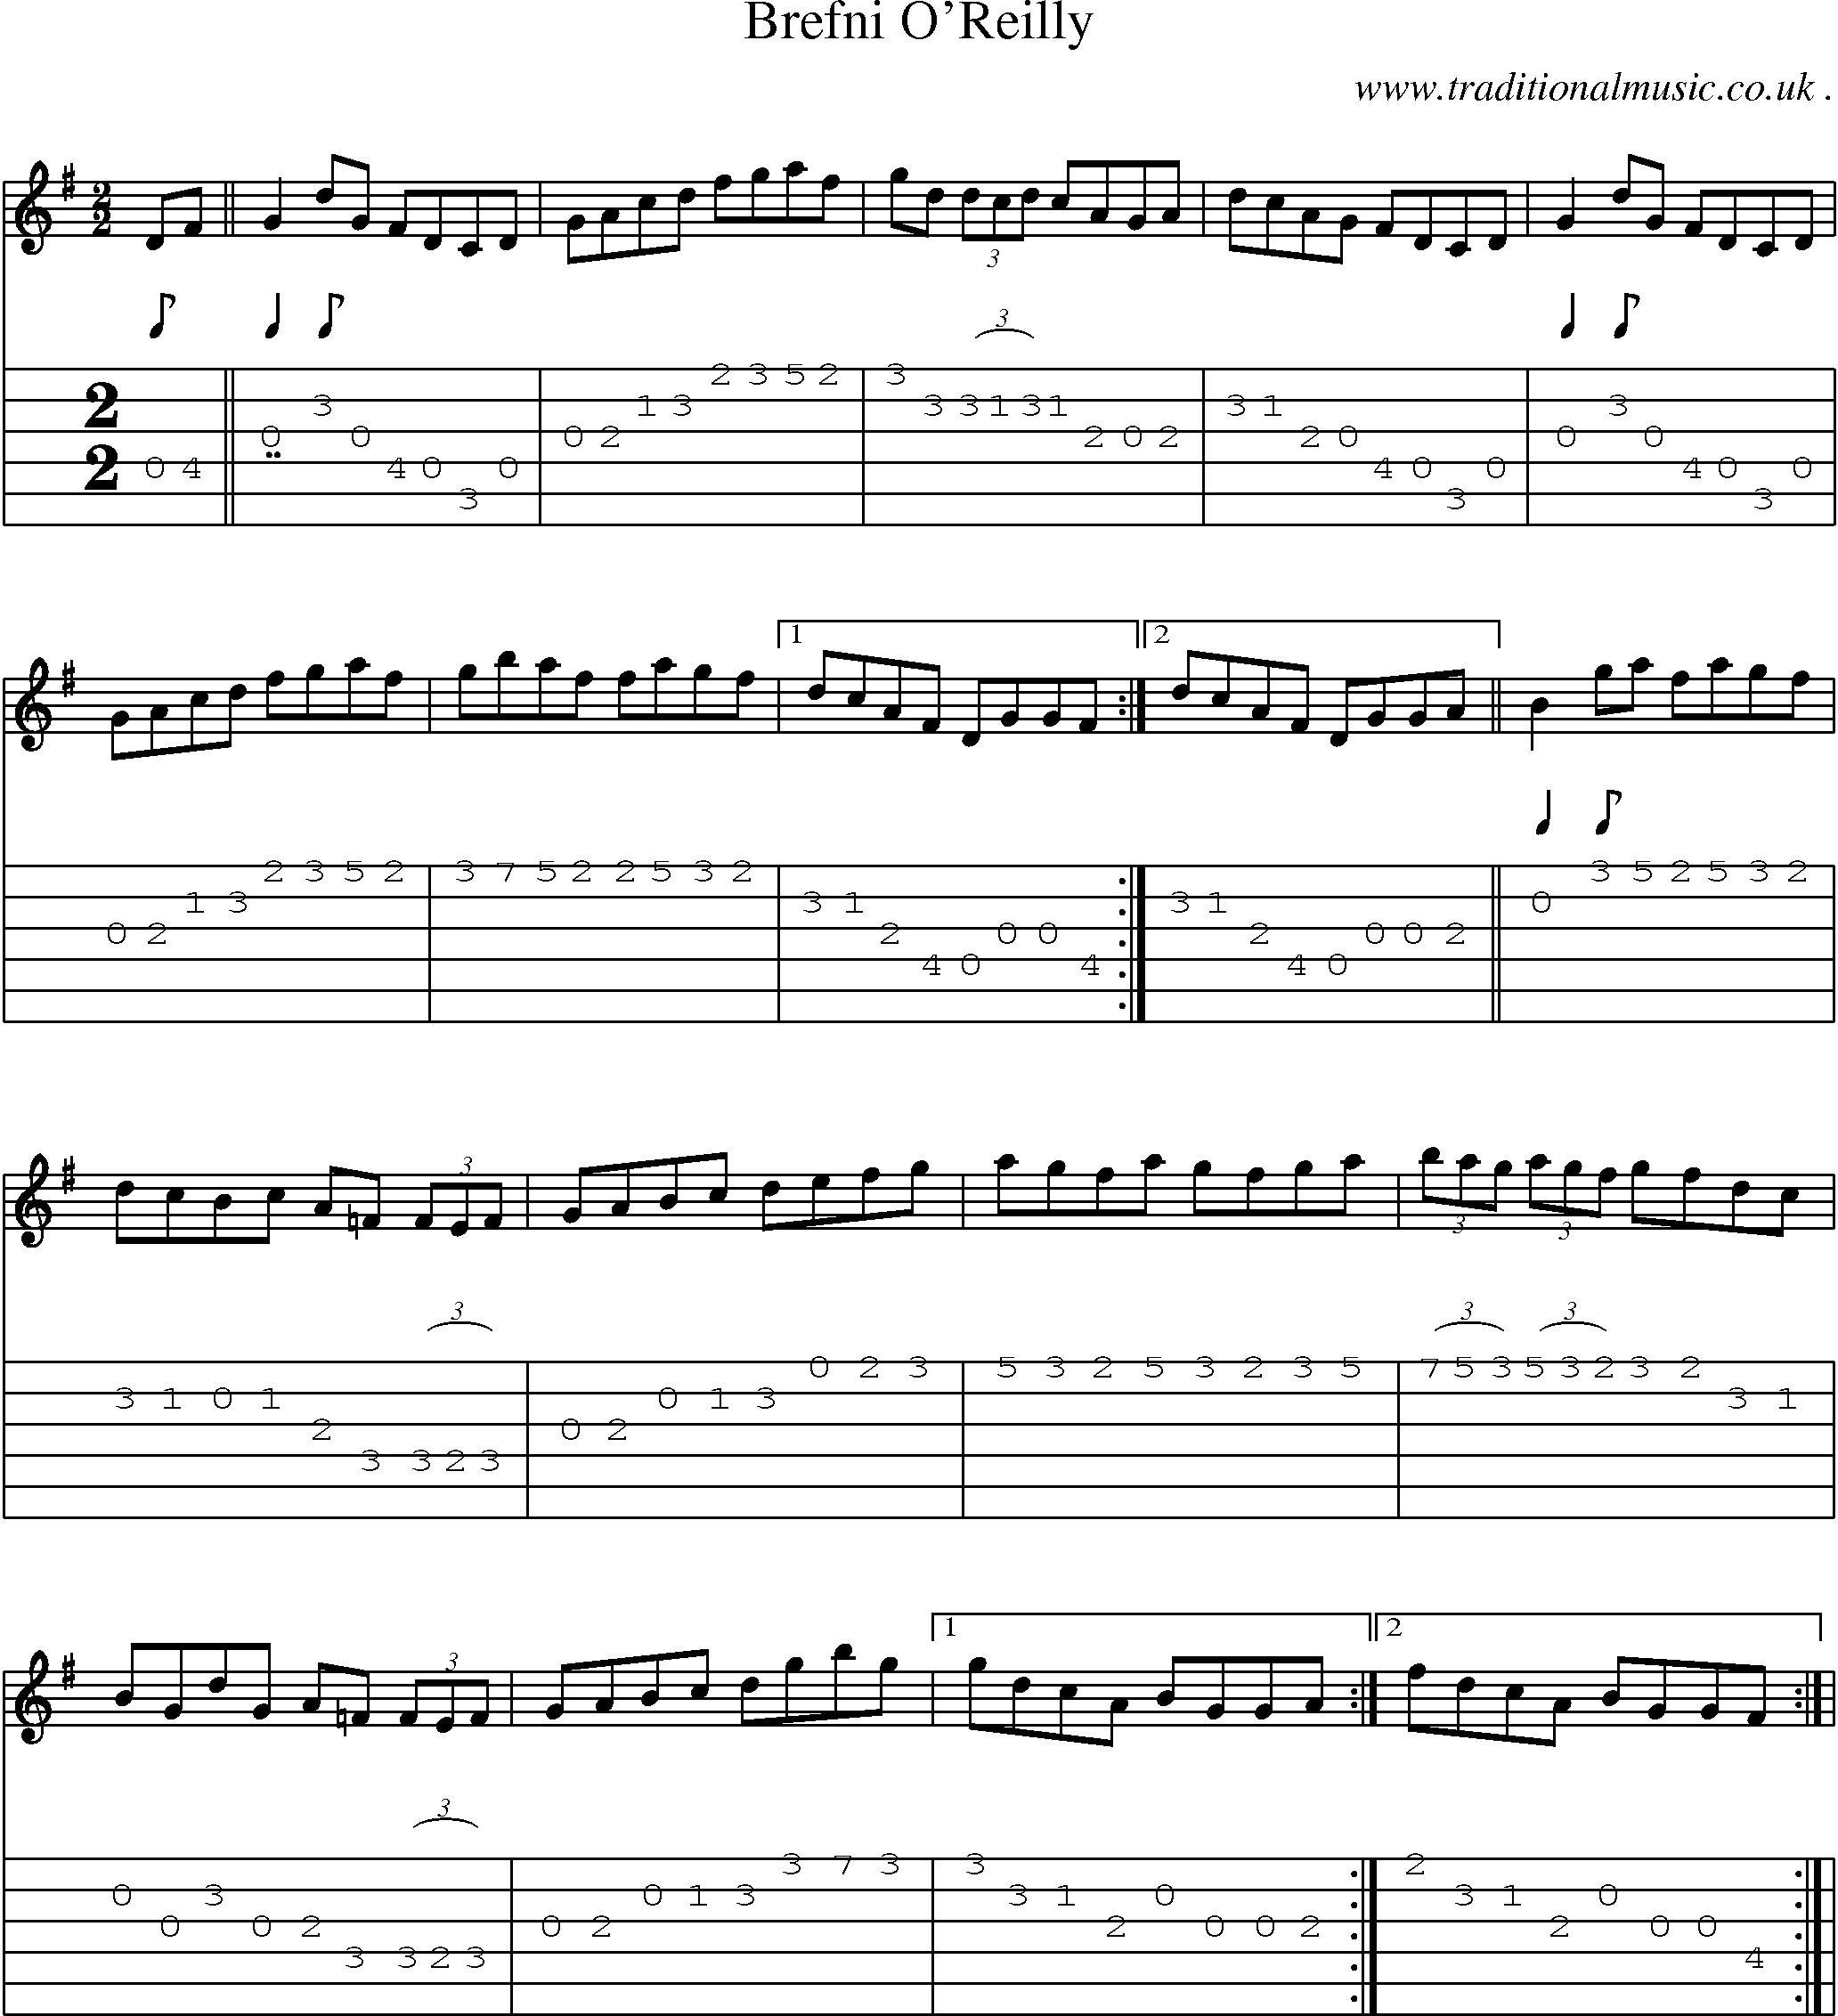 Sheet-Music and Guitar Tabs for Brefni Oreilly